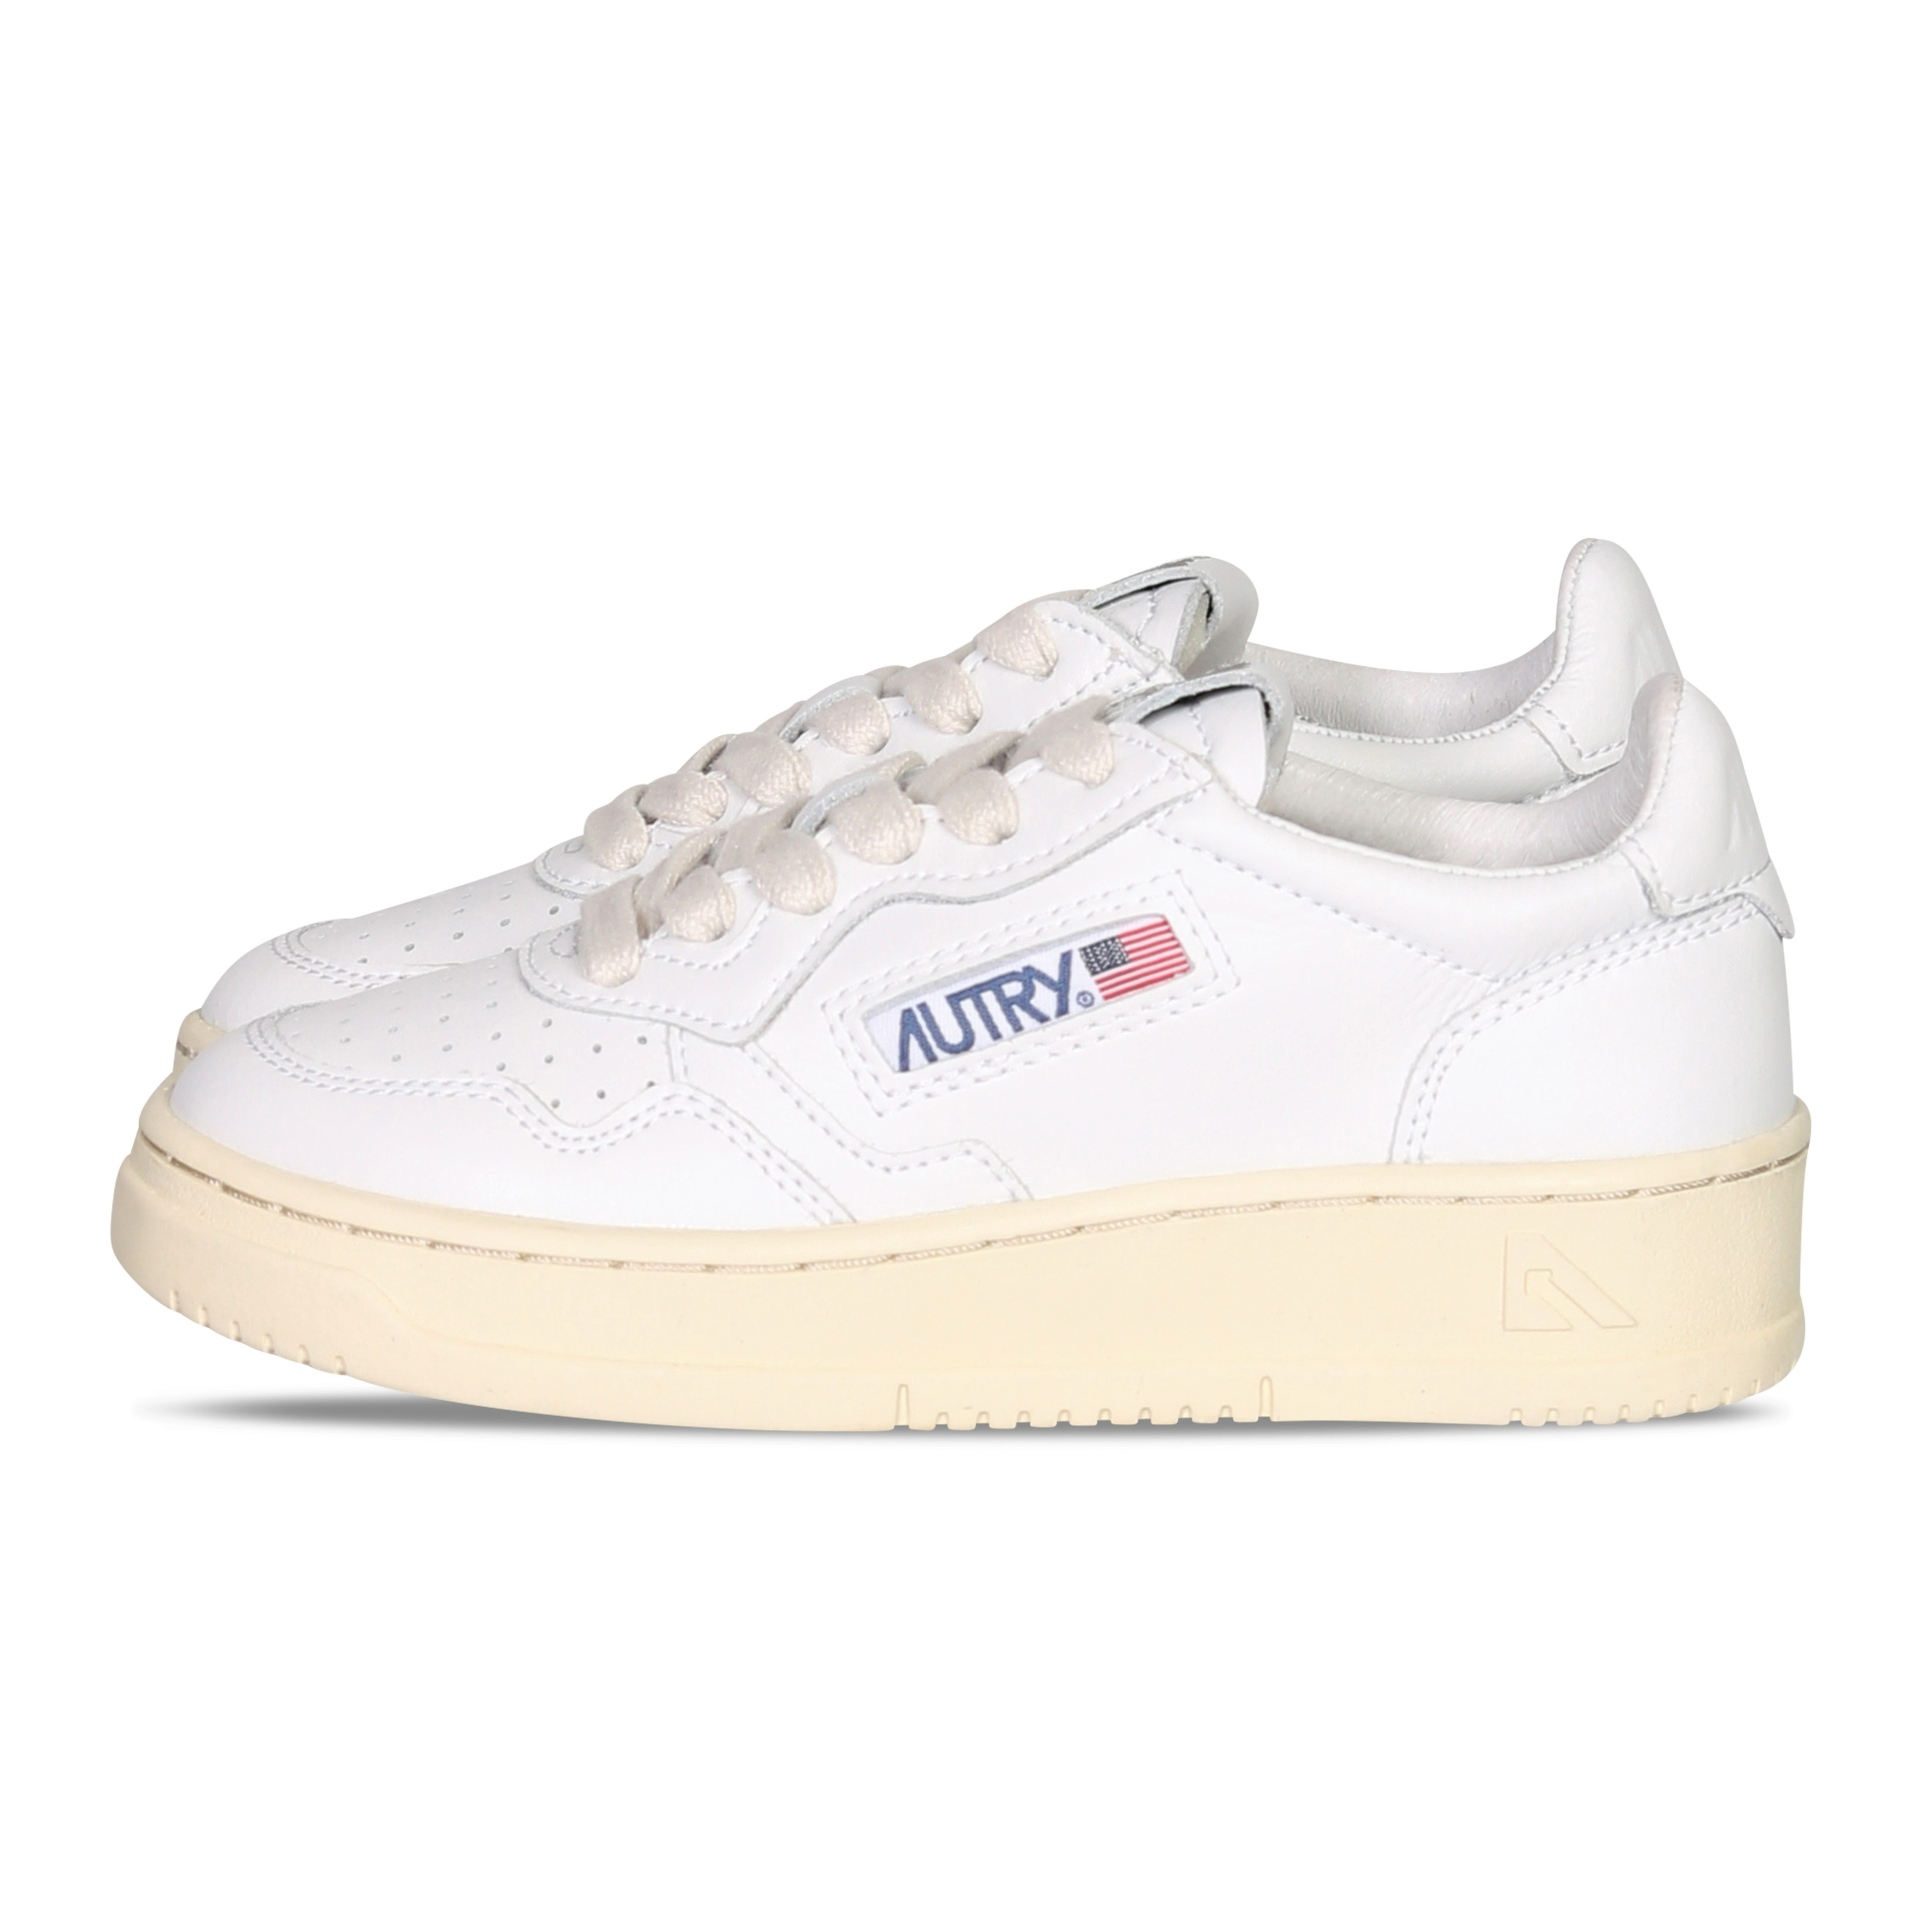 -KIDS- AUTRY ACTION SHOES Low Sneaker in White Draw Action People 26